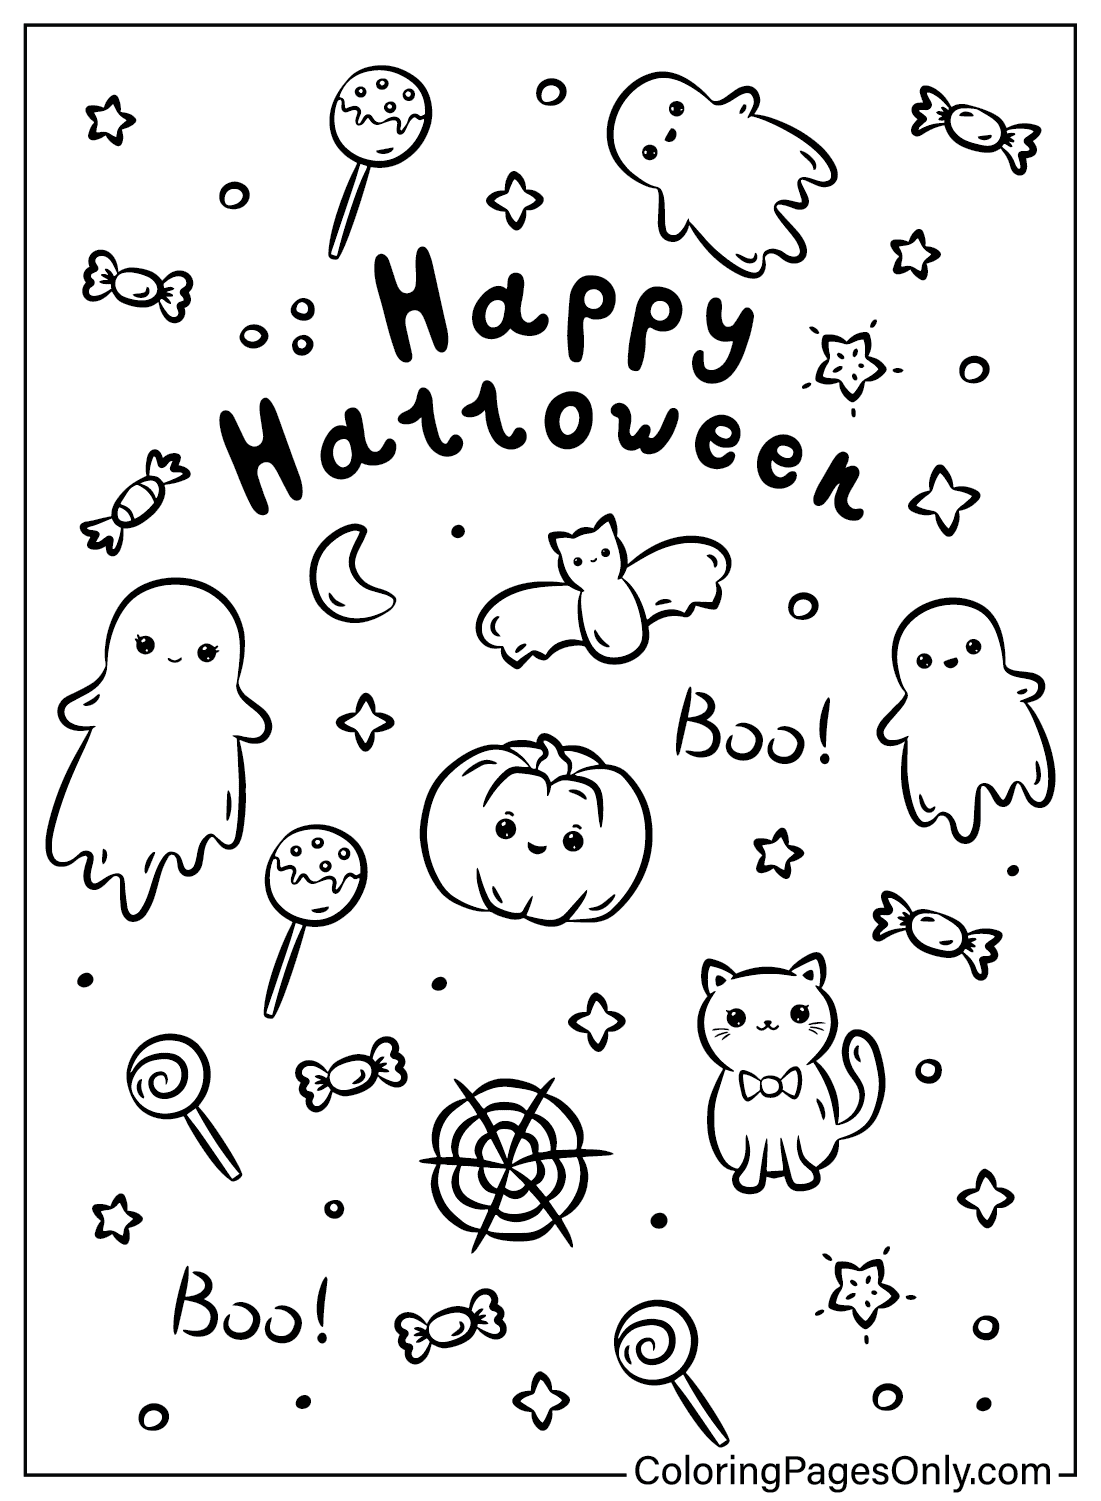 Kawaii Halloween Coloring Pages - Free Printable Coloring Pages